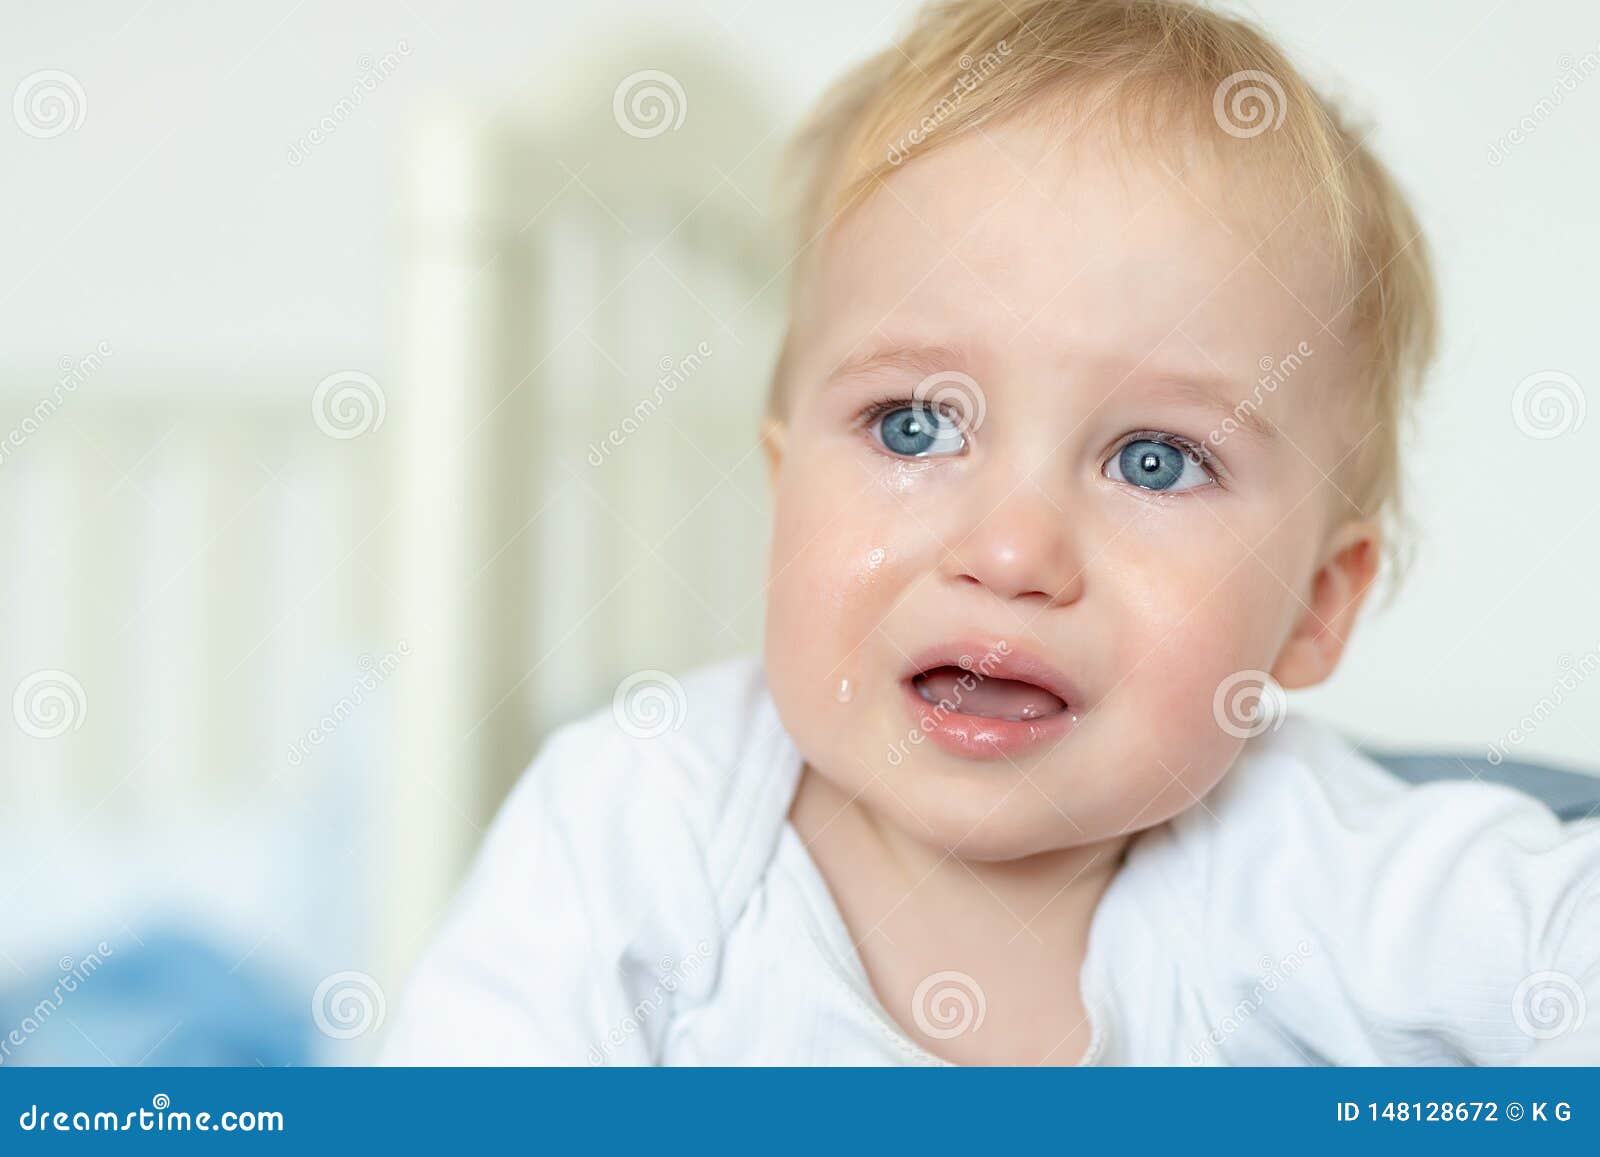 cute caucasian blond toddler boy portrait crying at home during hysterics. little child feeling sad. small pensive baby after